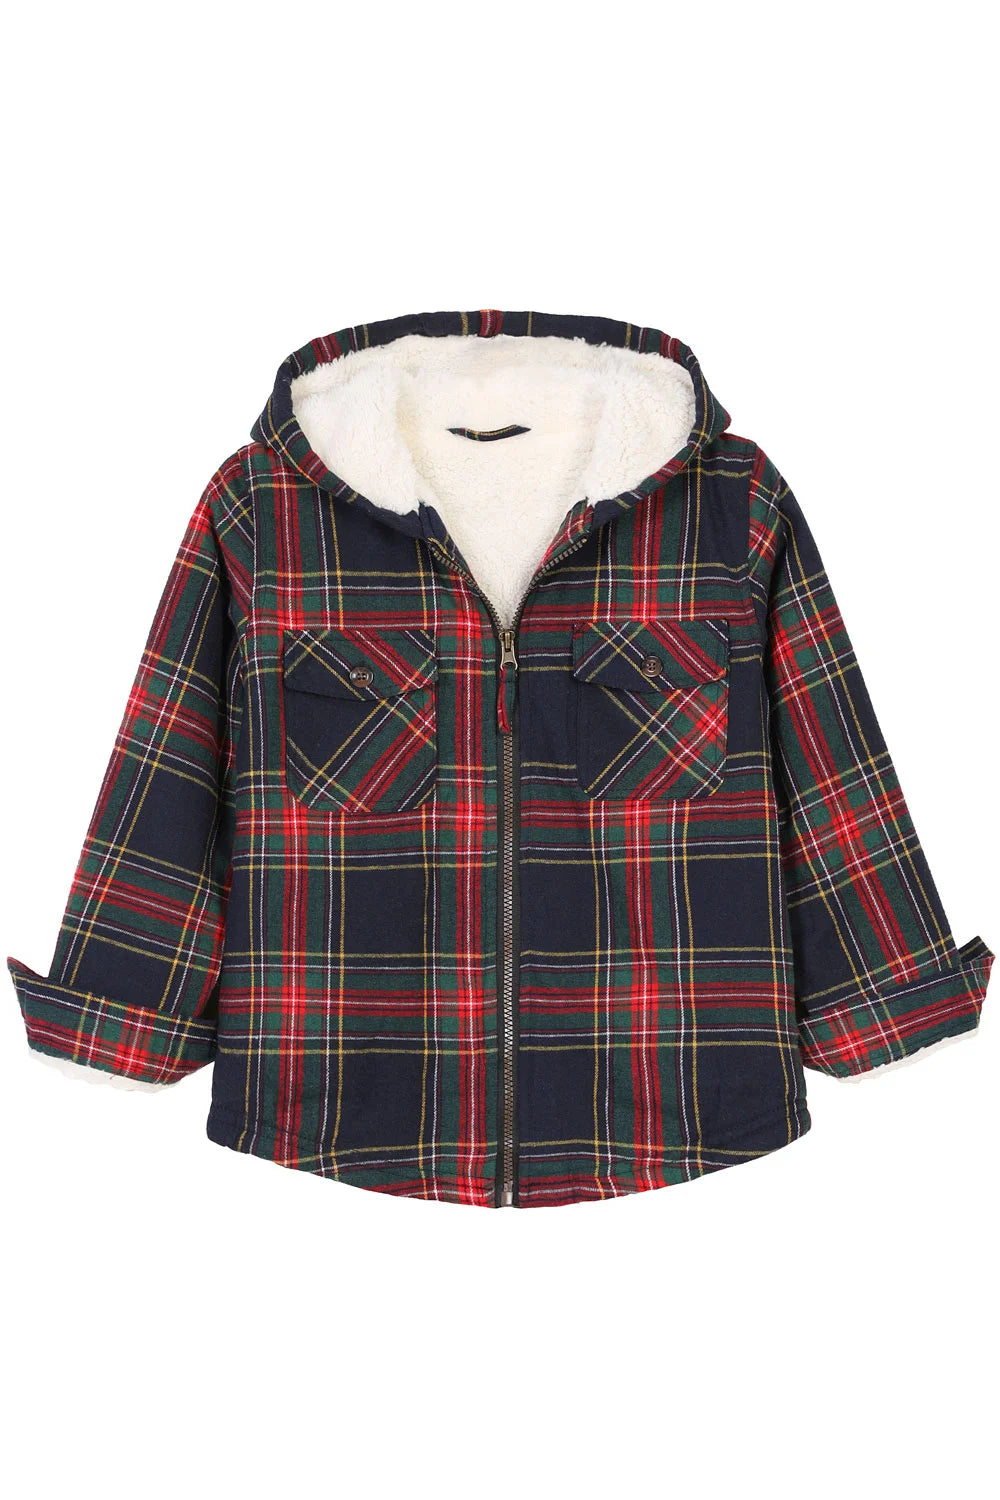 Girls Sherpa Lined Full Zip Plaid Flannel Shirt,Hooded Flannel Jacket